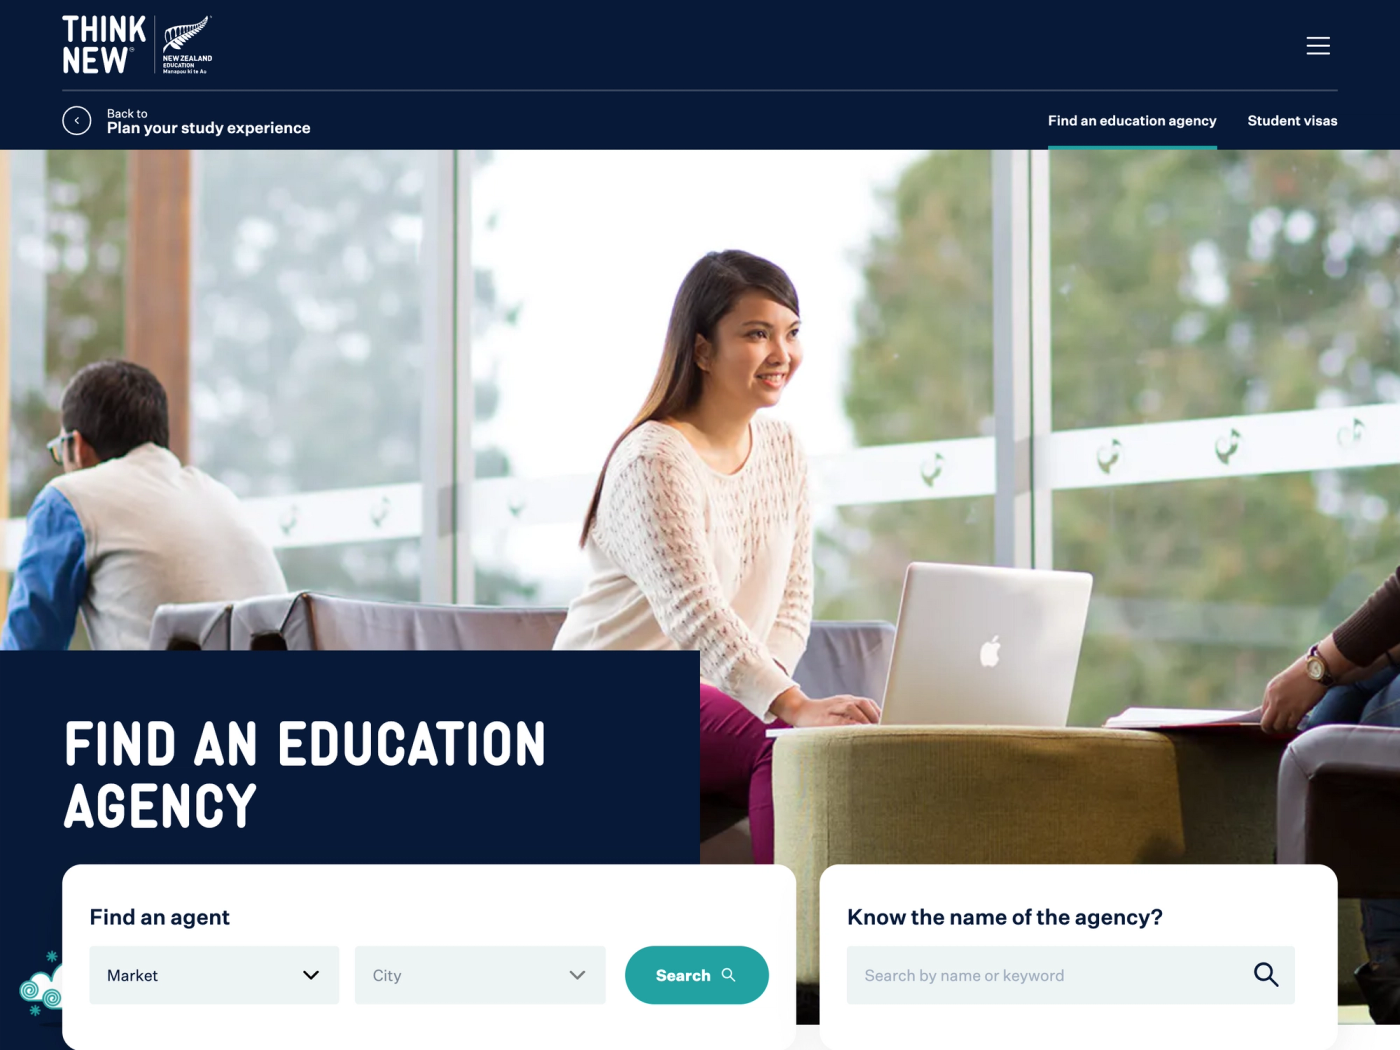 Screenshot of the "Find an education agency" page